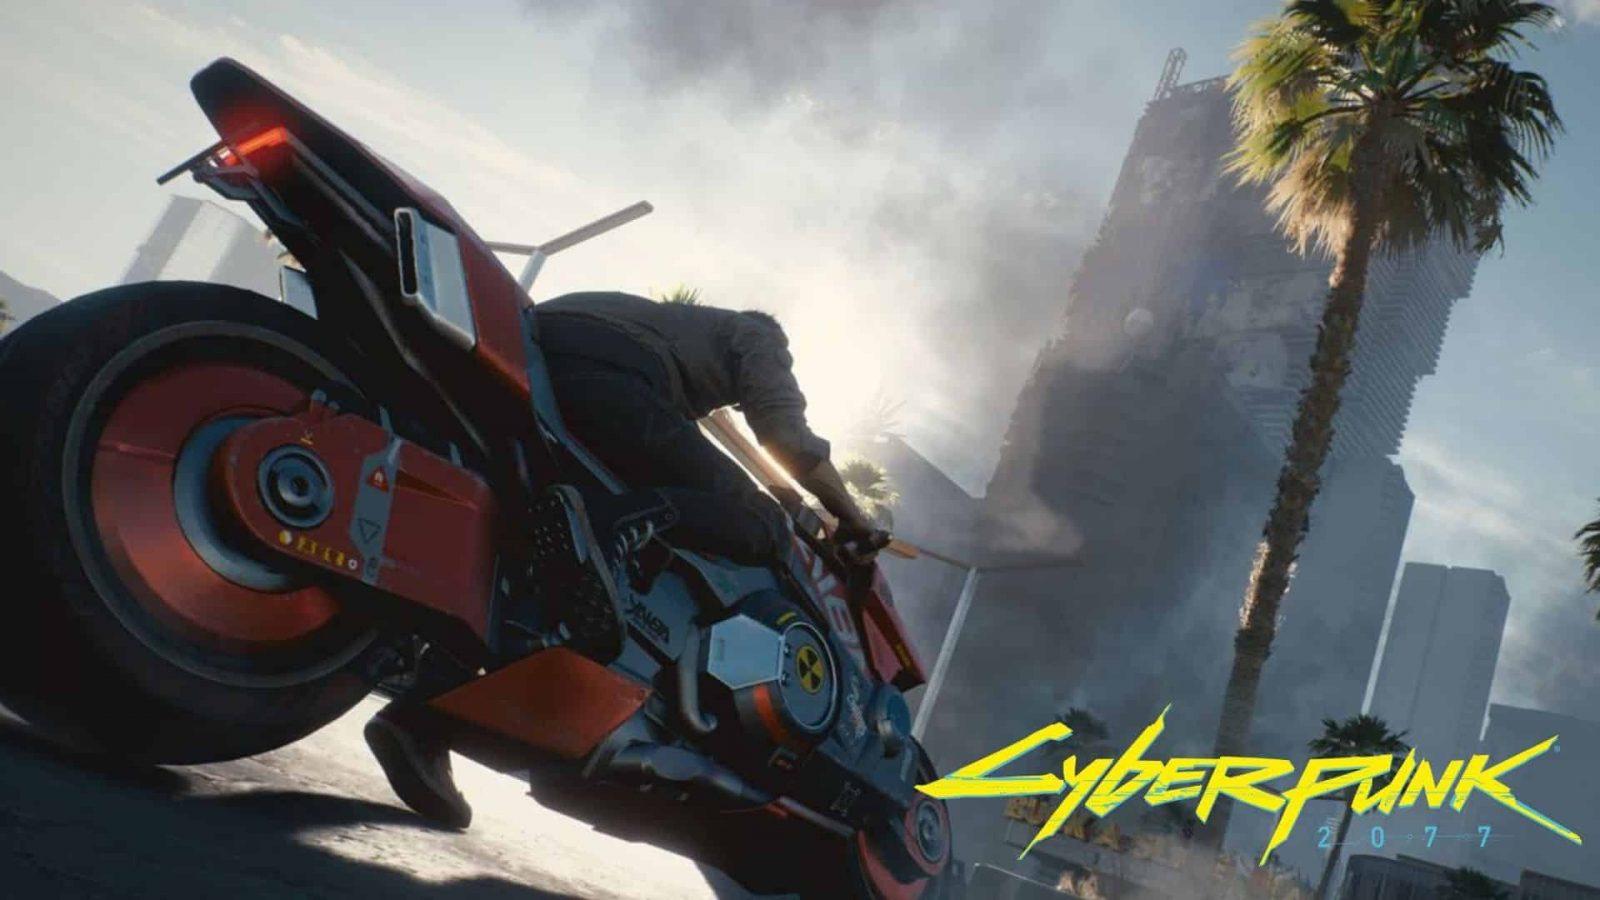 cyberpunk 2077 image showing a character on a motorbike